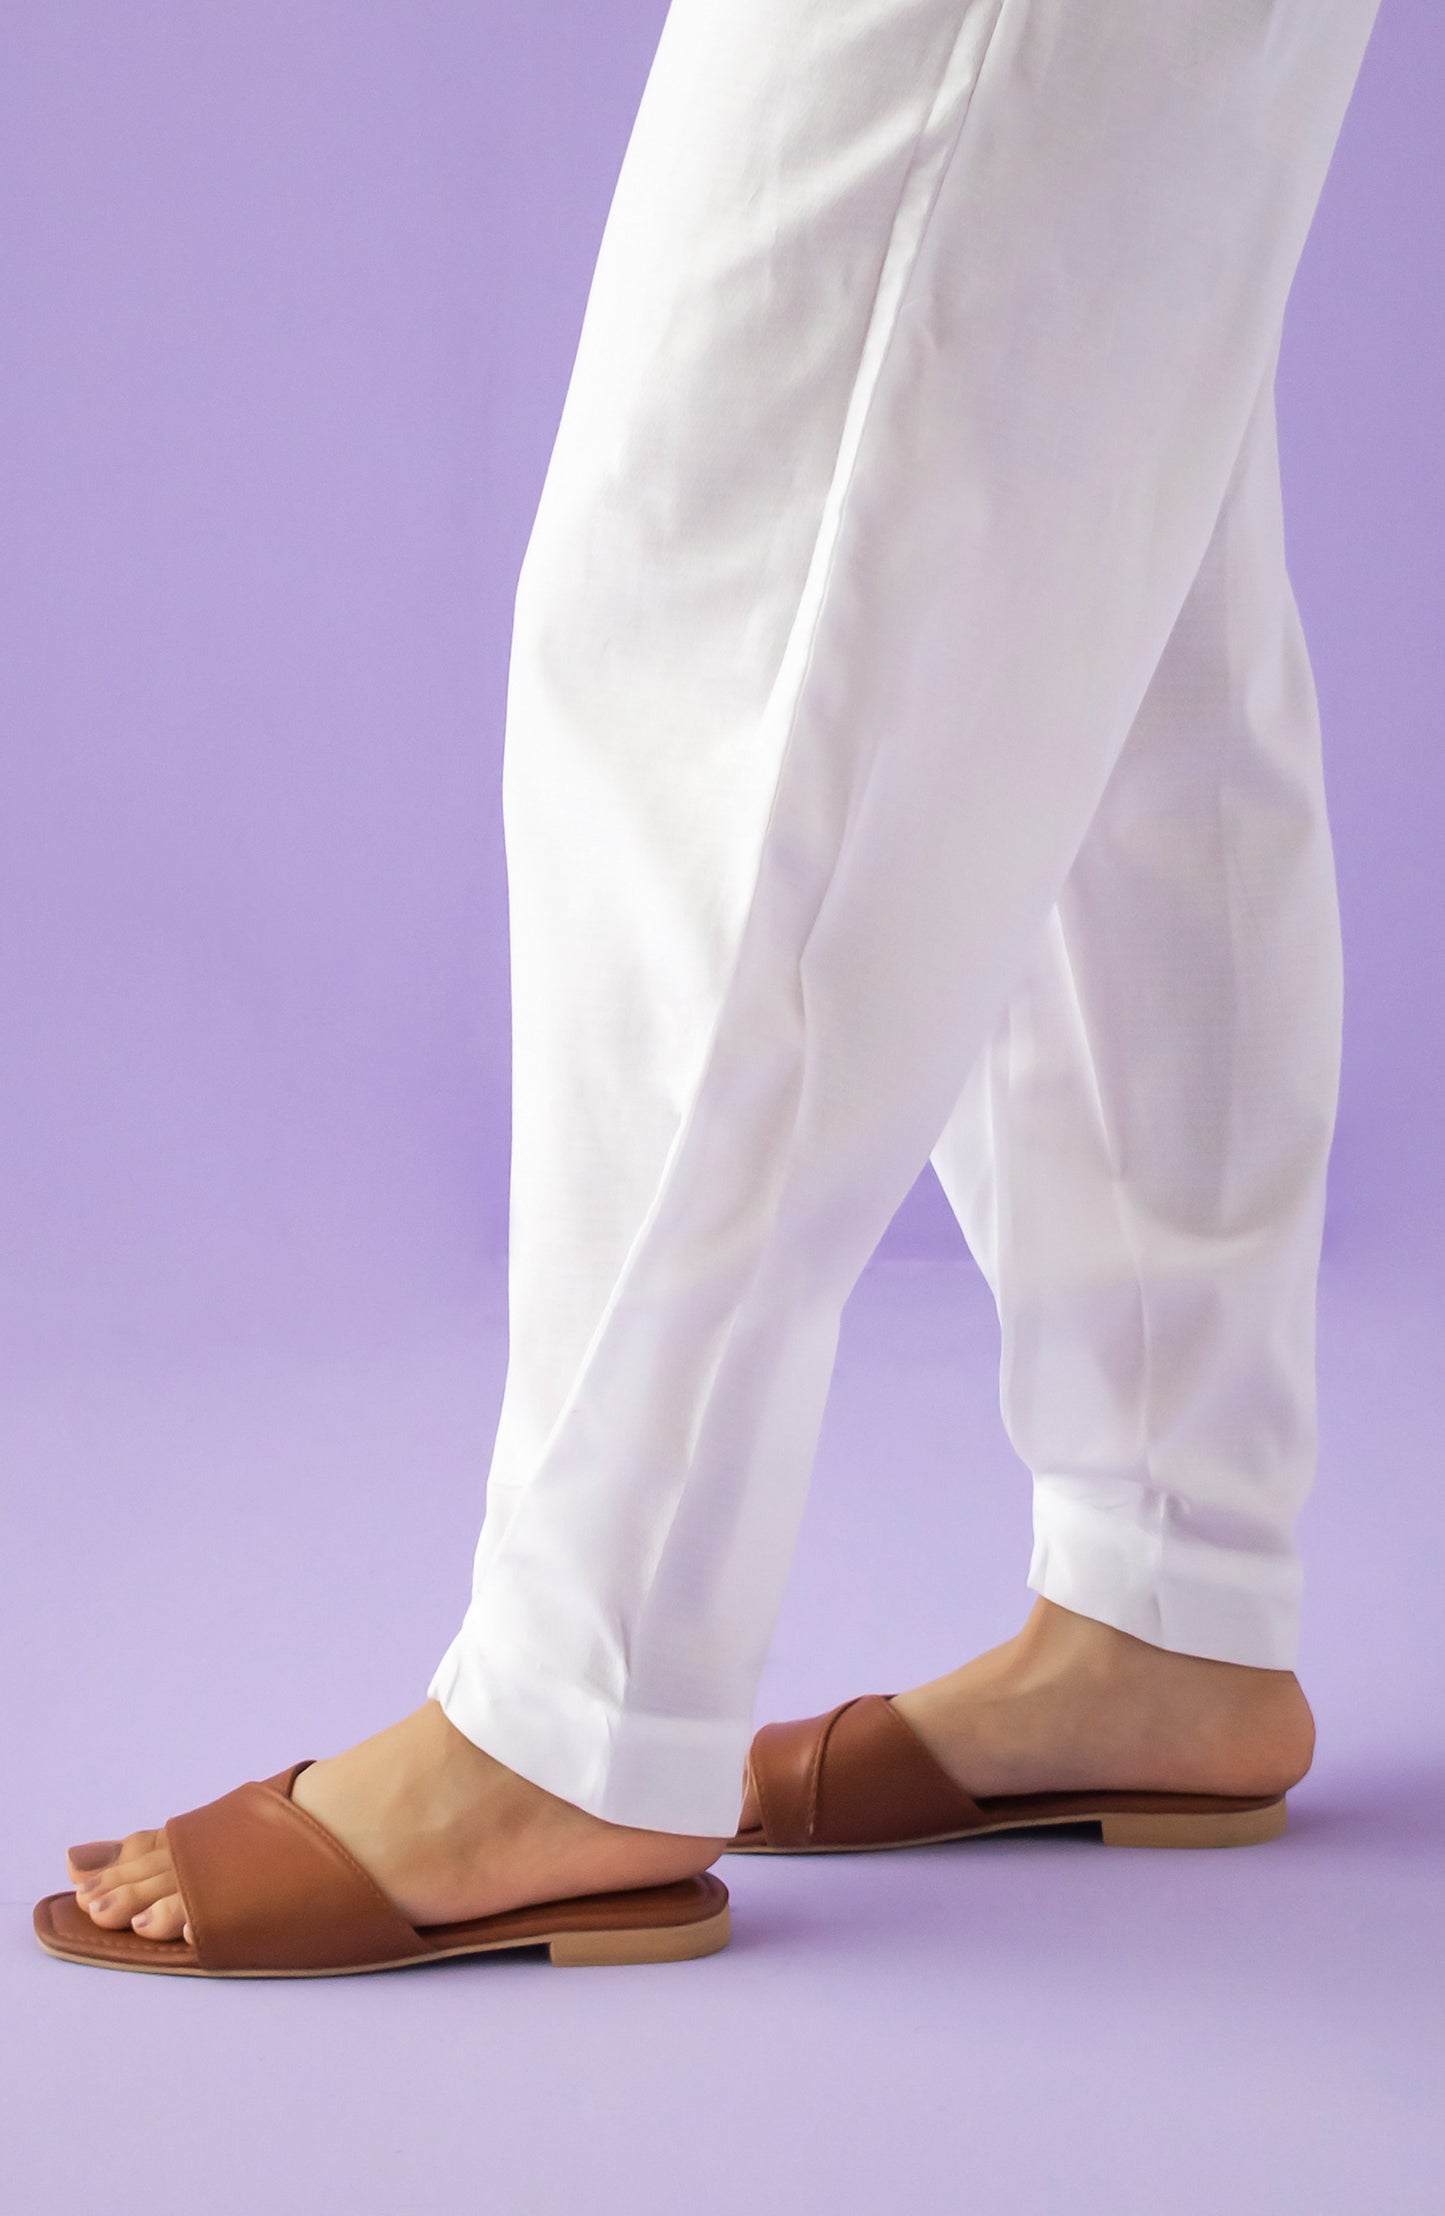 NB-T-PL-23-002 WHITE DOBBY SCTROUSER STITCHED BOTTOMS TROUSER